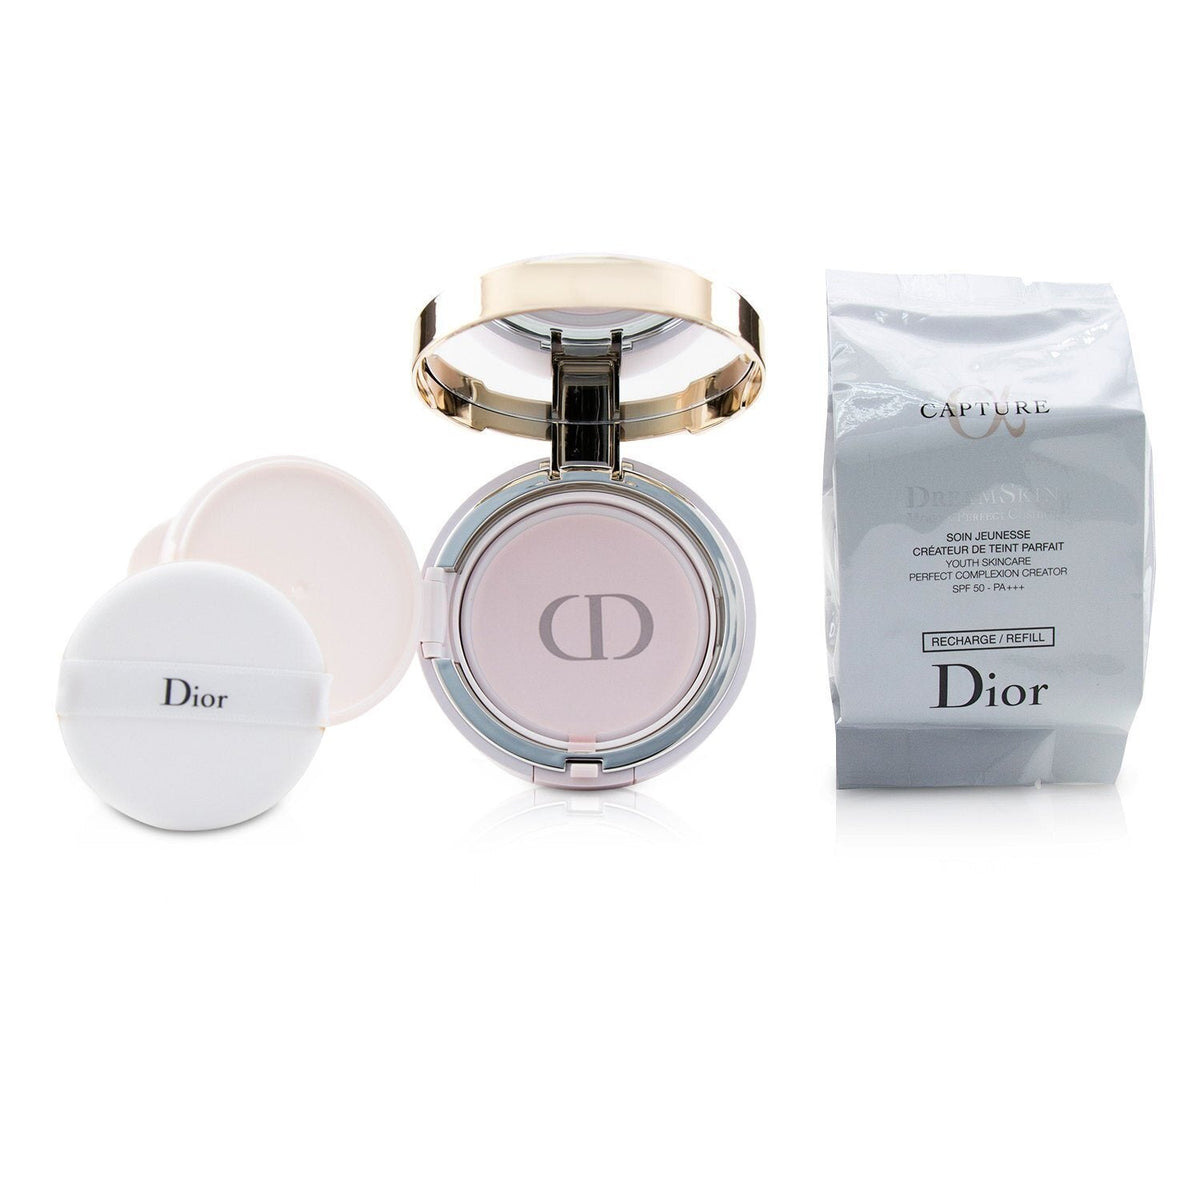 CHRISTIAN DIOR - Capture Dreamskin Moist & Perfect SPF 50 With Extra Refill - # 030 (Medium Beige) - Premium Moisturizers from Christian Dior - Just $115! Shop now at Ida Louise Boutique